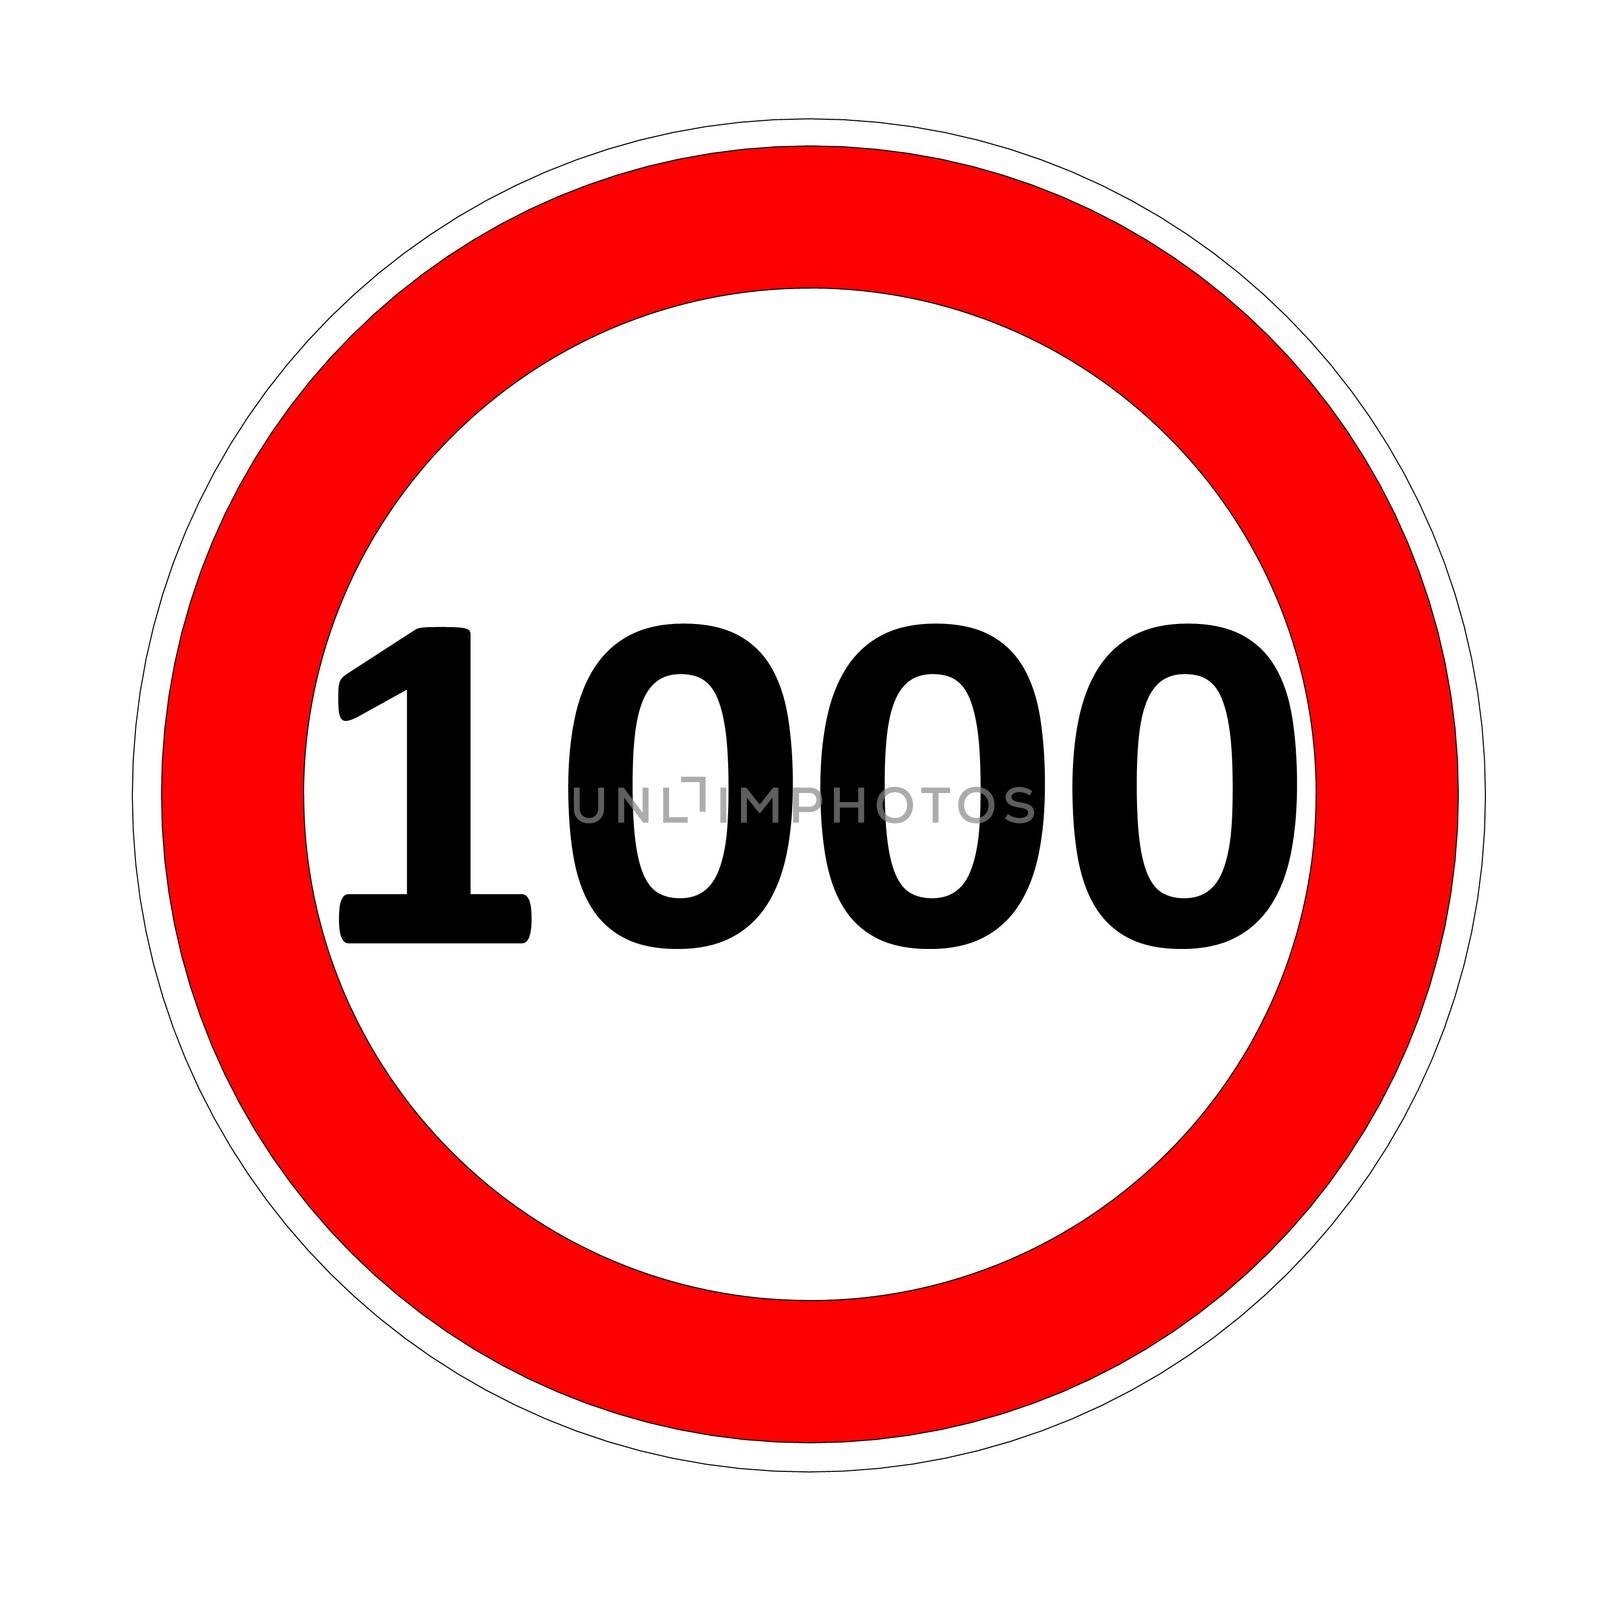 Speed limit sign for 1000 by Elenaphotos21